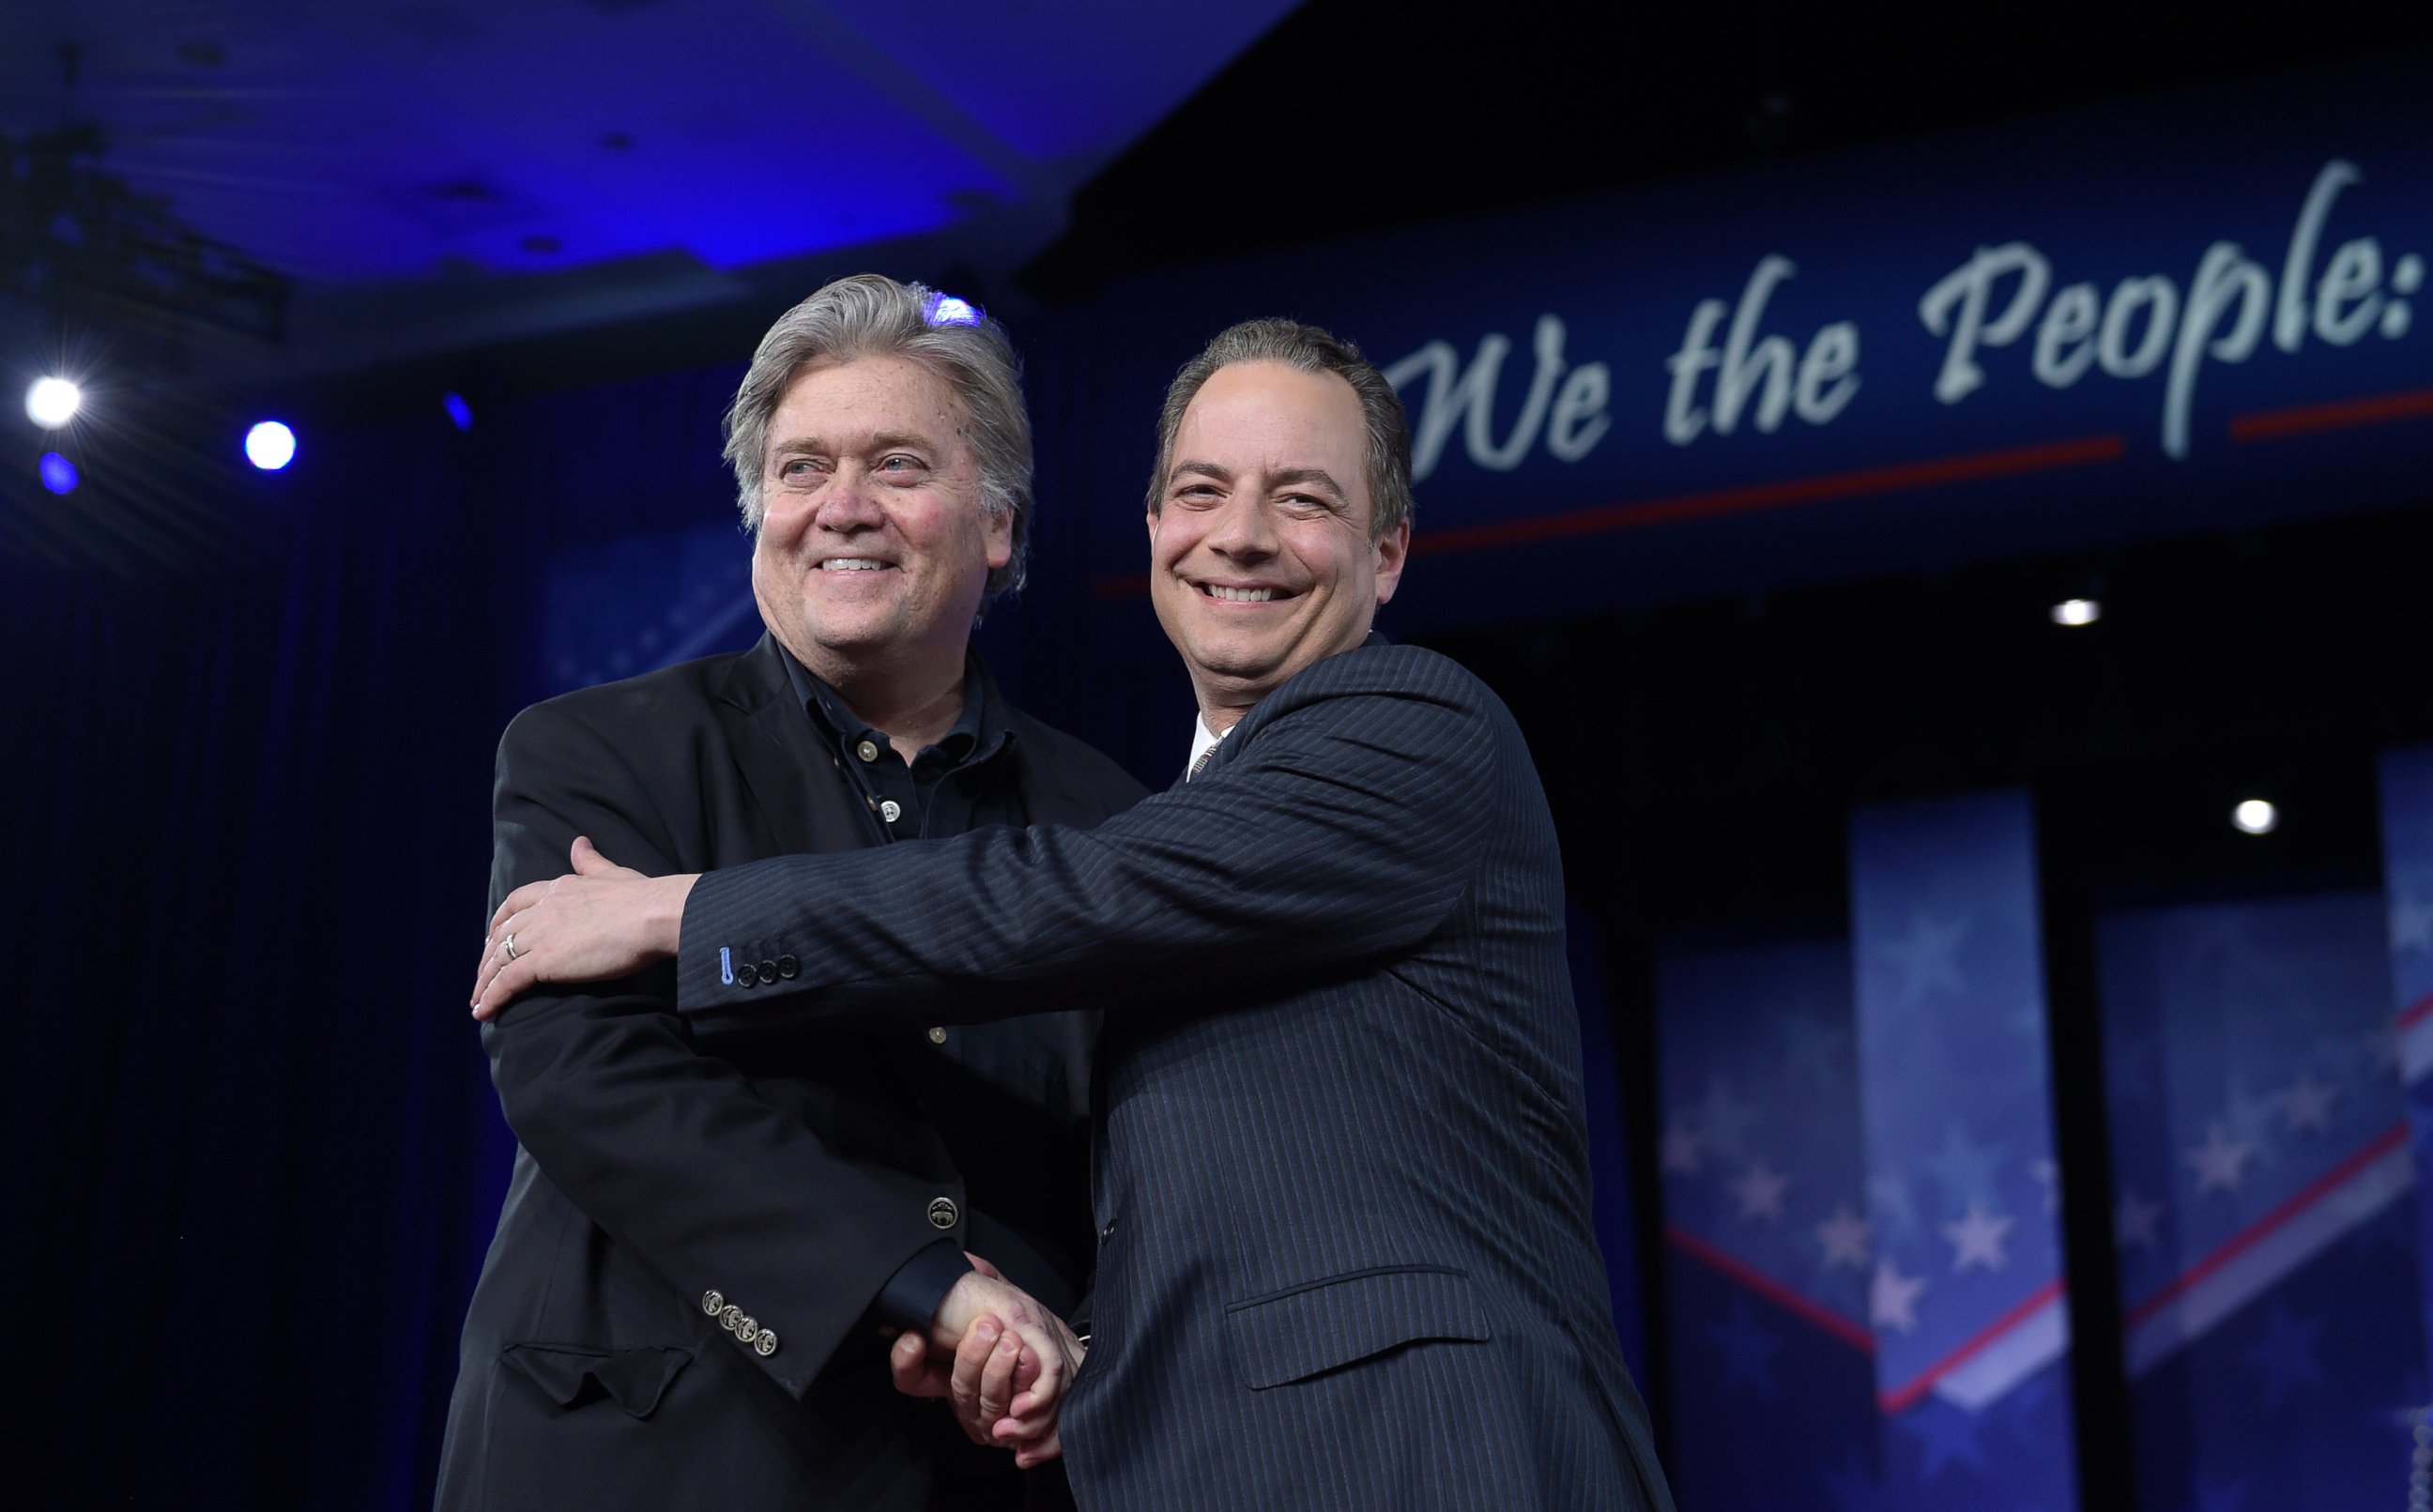 PHOTO: White House Chief of Staff Reince Priebus, right, hugs White House strategist Stephen Bannon as they are introduced to speak at the Conservative Political Action Conference (CPAC) in Oxon Hill, Maryland, Feb. 23, 2017. 